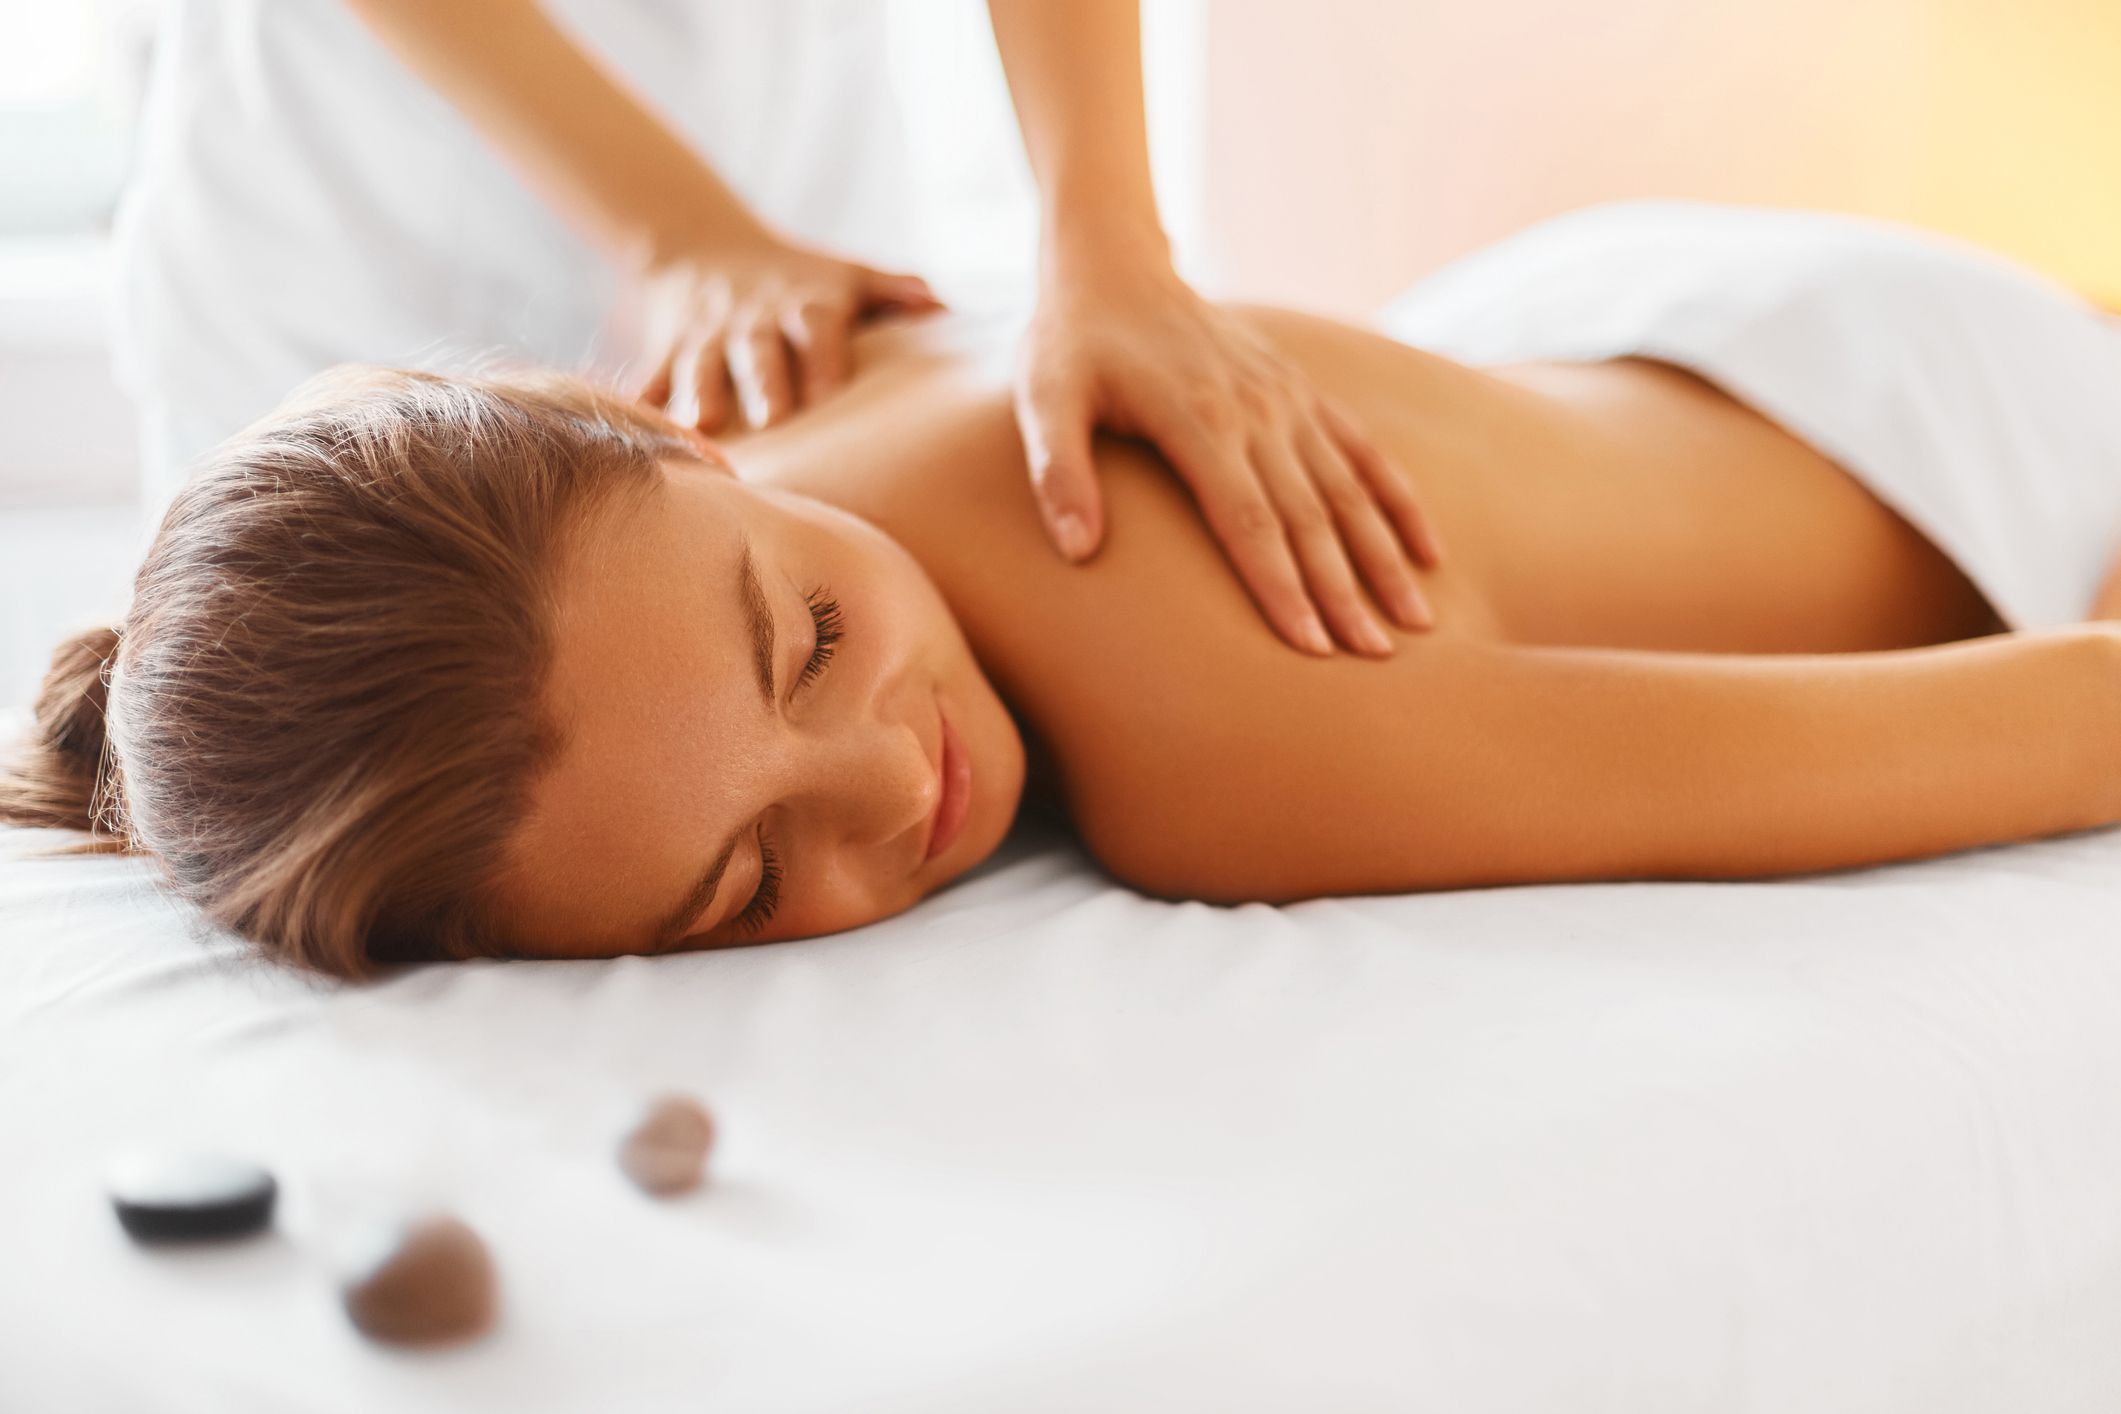 What Are The Health Benefits of a Massage?